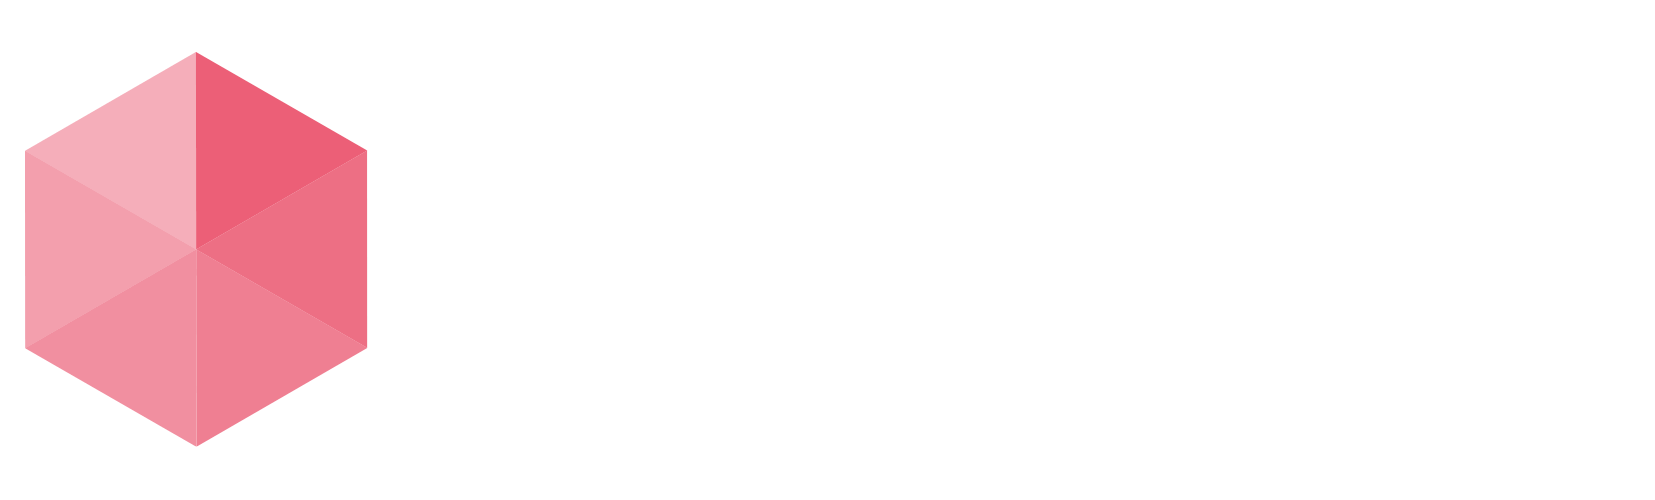 SCOPE International SCORIS Logo technology safety reporting system white font and red rhombus